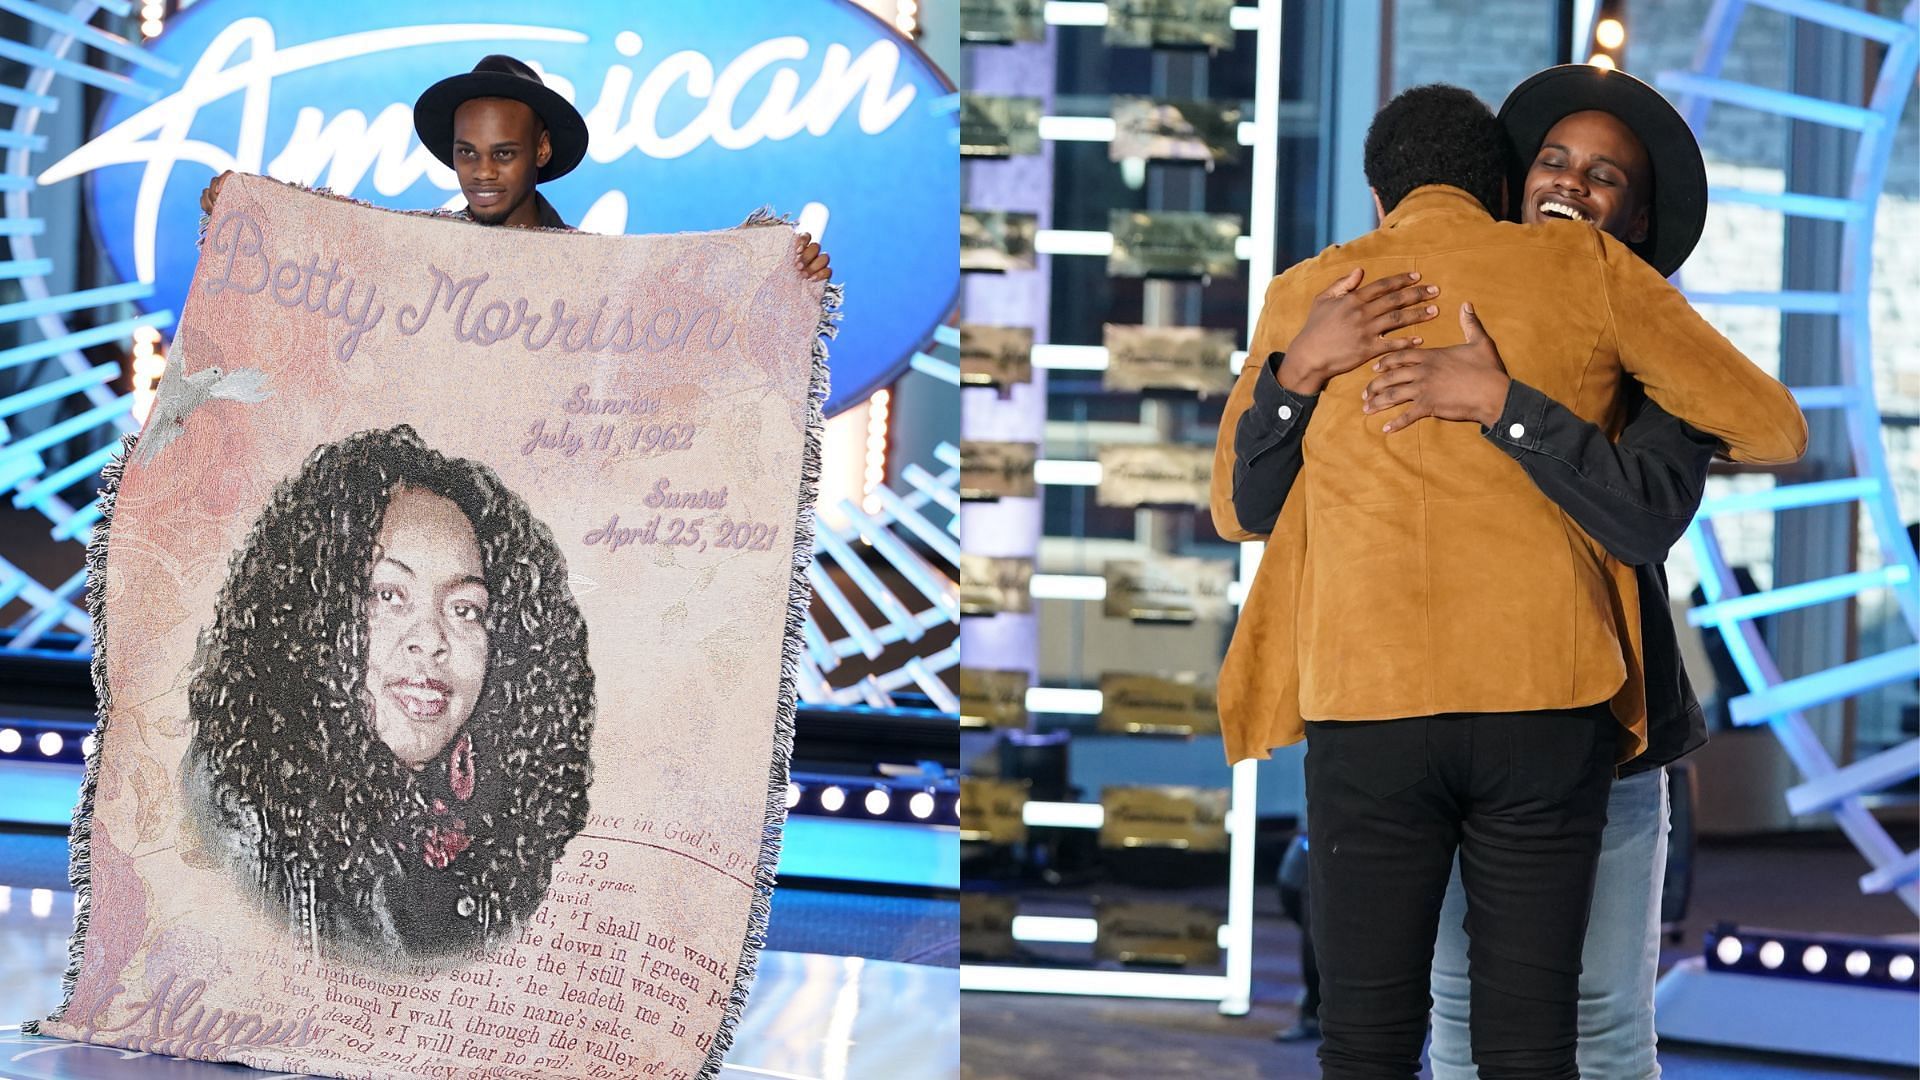 American Idol contestant Dontrell Briggs pays tribute to his godmother (Image via Eric McCandless/ABC)